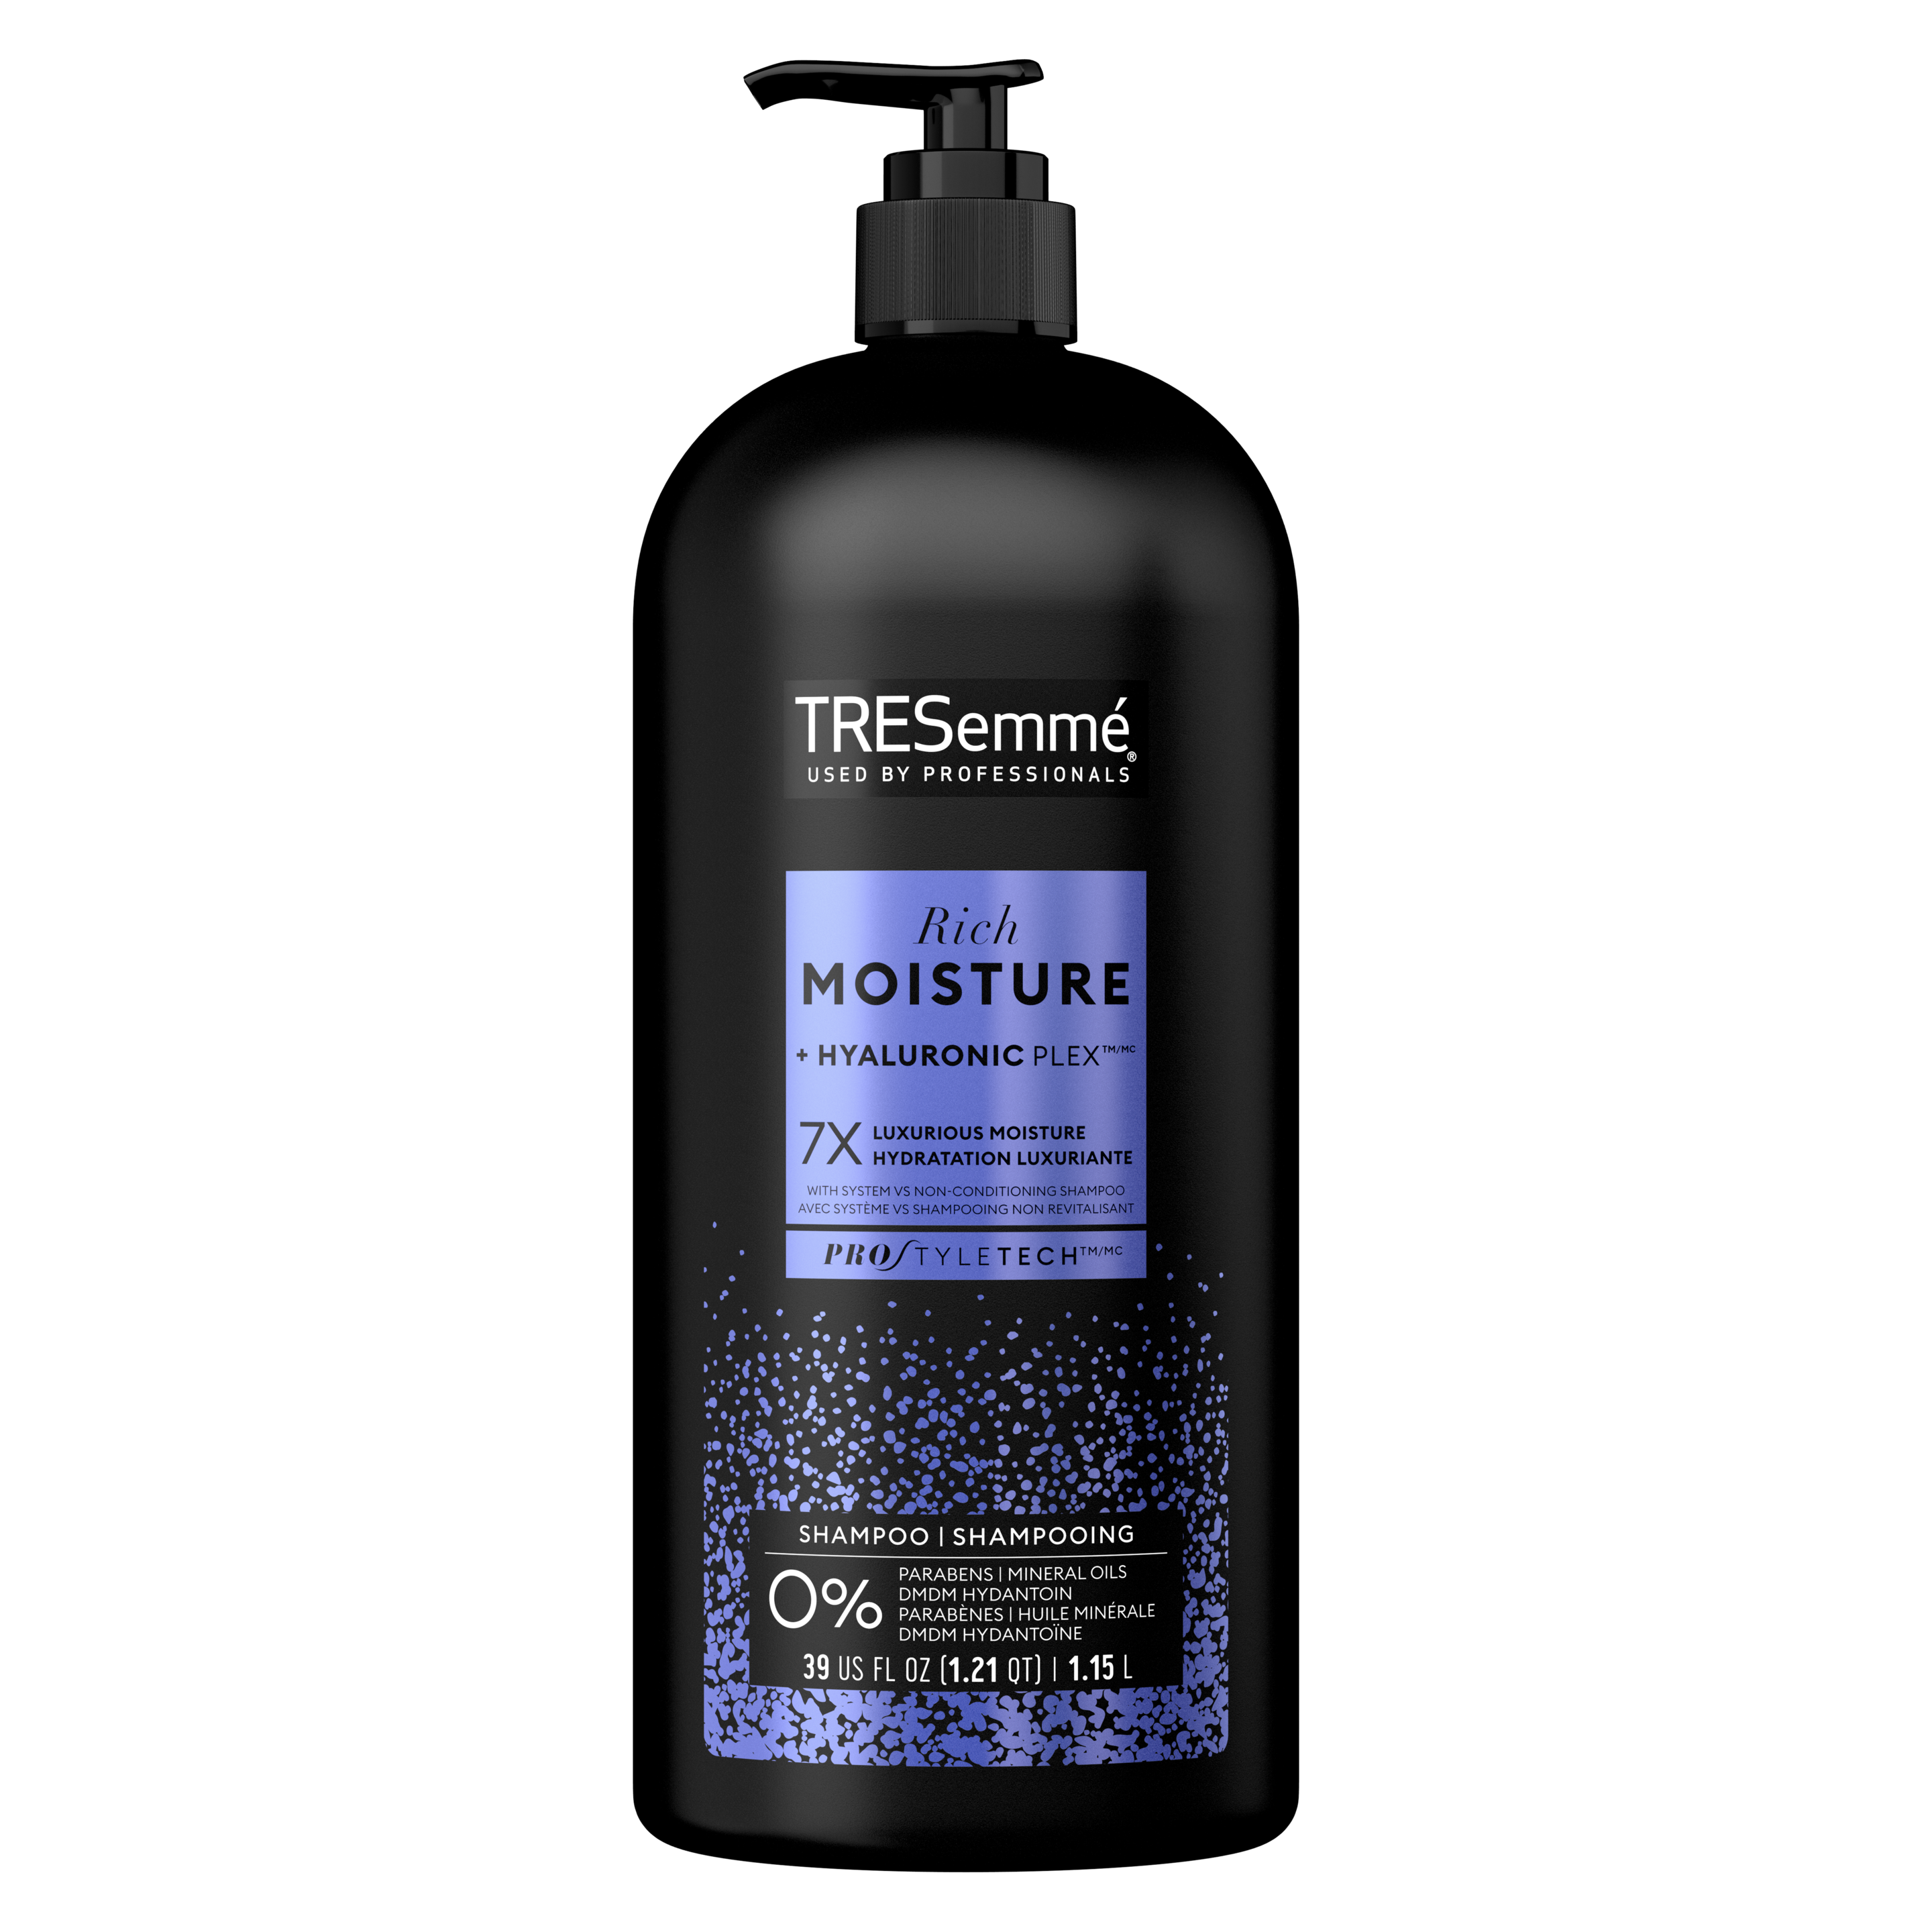 Rich Moisture Shampoo for Dry Hair View our product collections